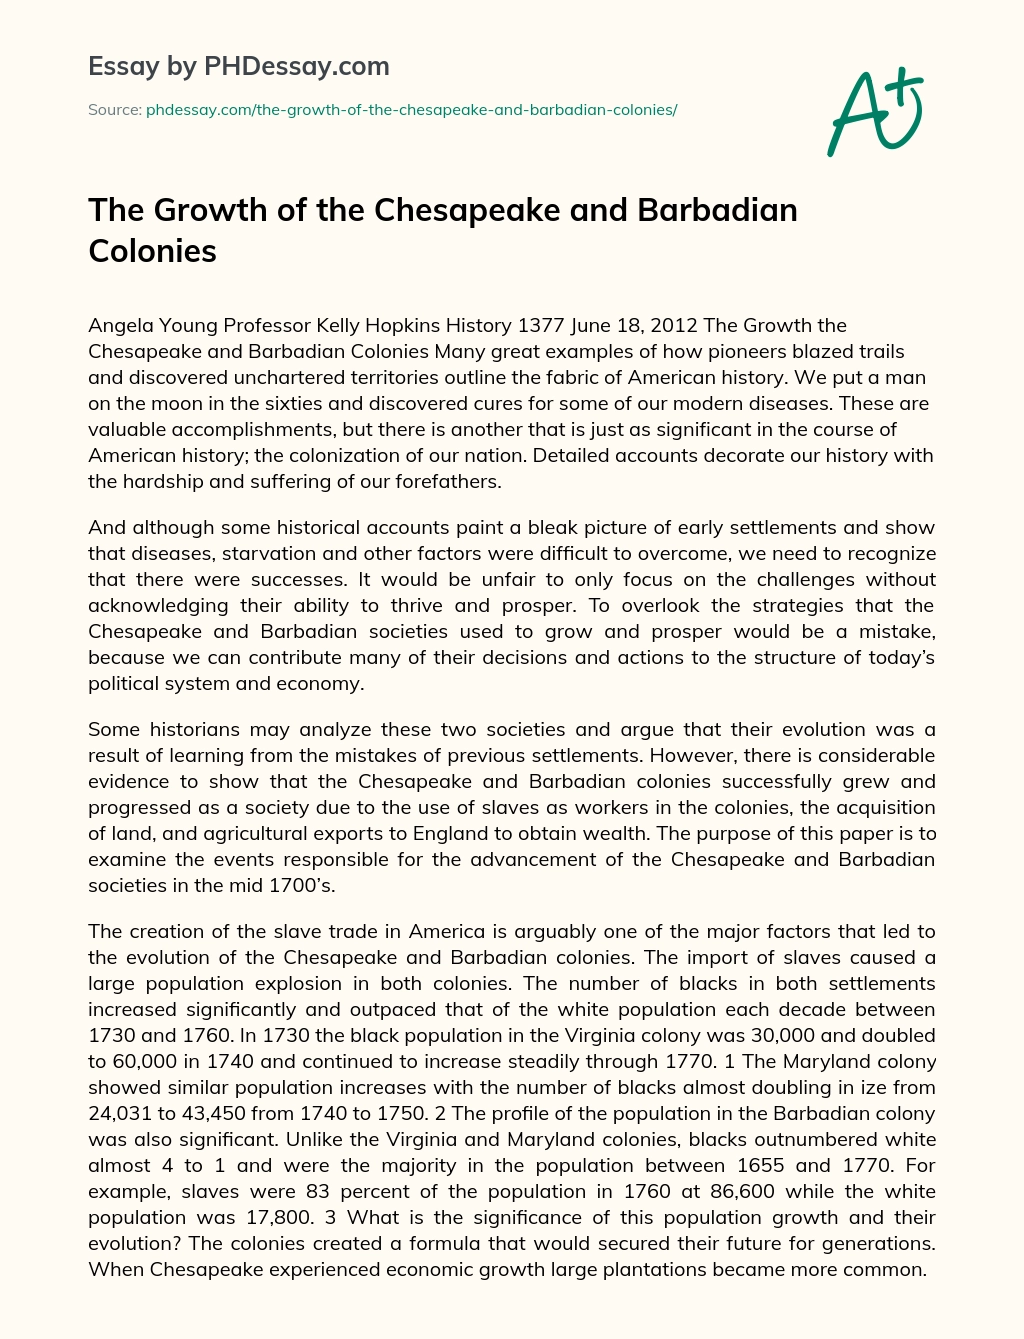 The Growth of the Chesapeake and Barbadian Colonies essay